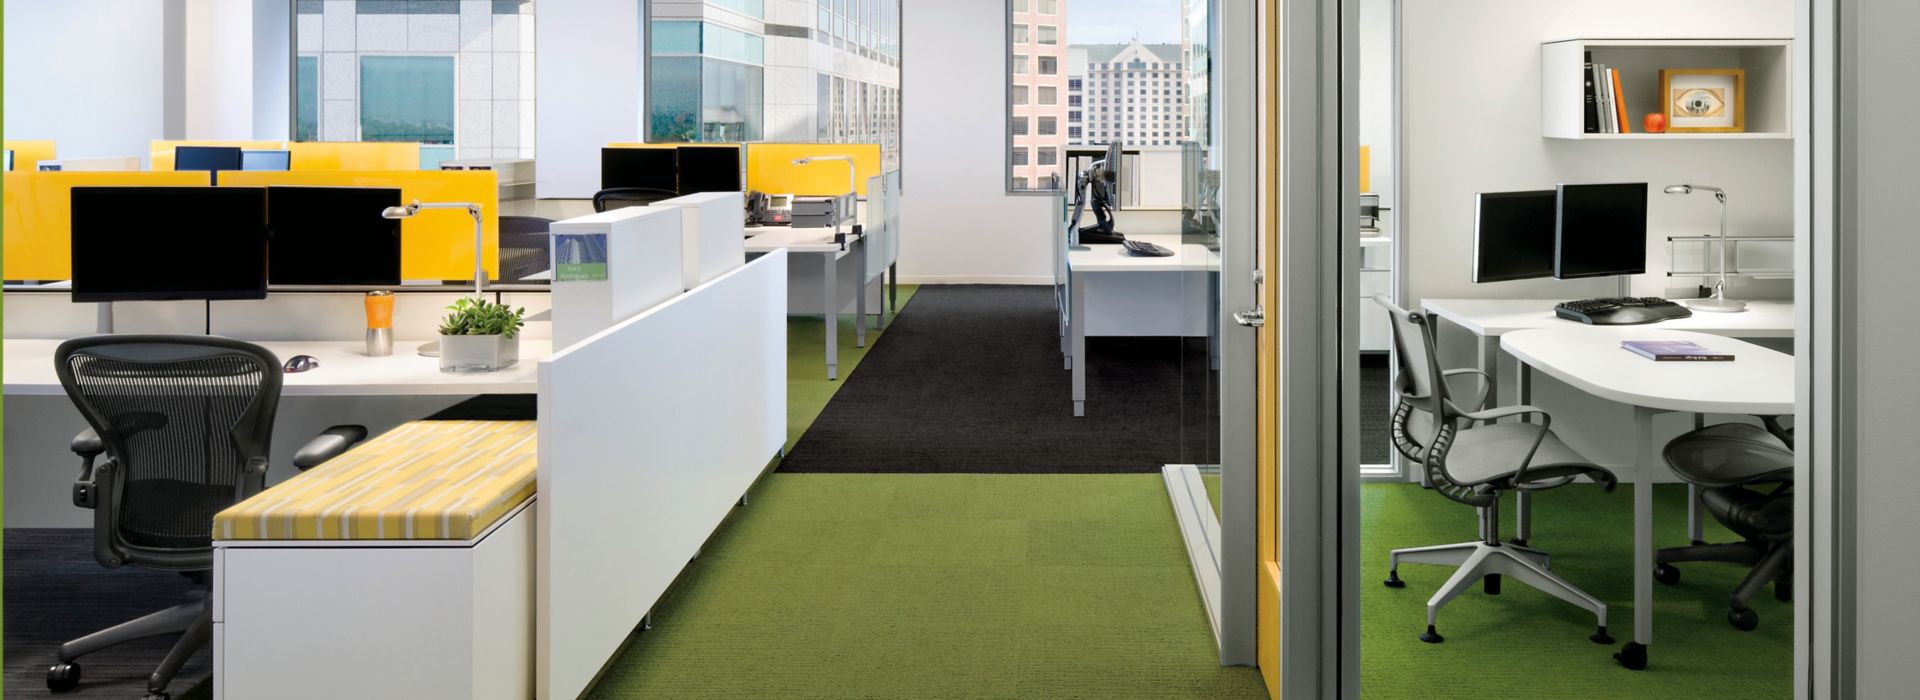 Interface Monochrome and Striation carpet tile in walkway of office with multiple open offices and a private office numéro d’image 1